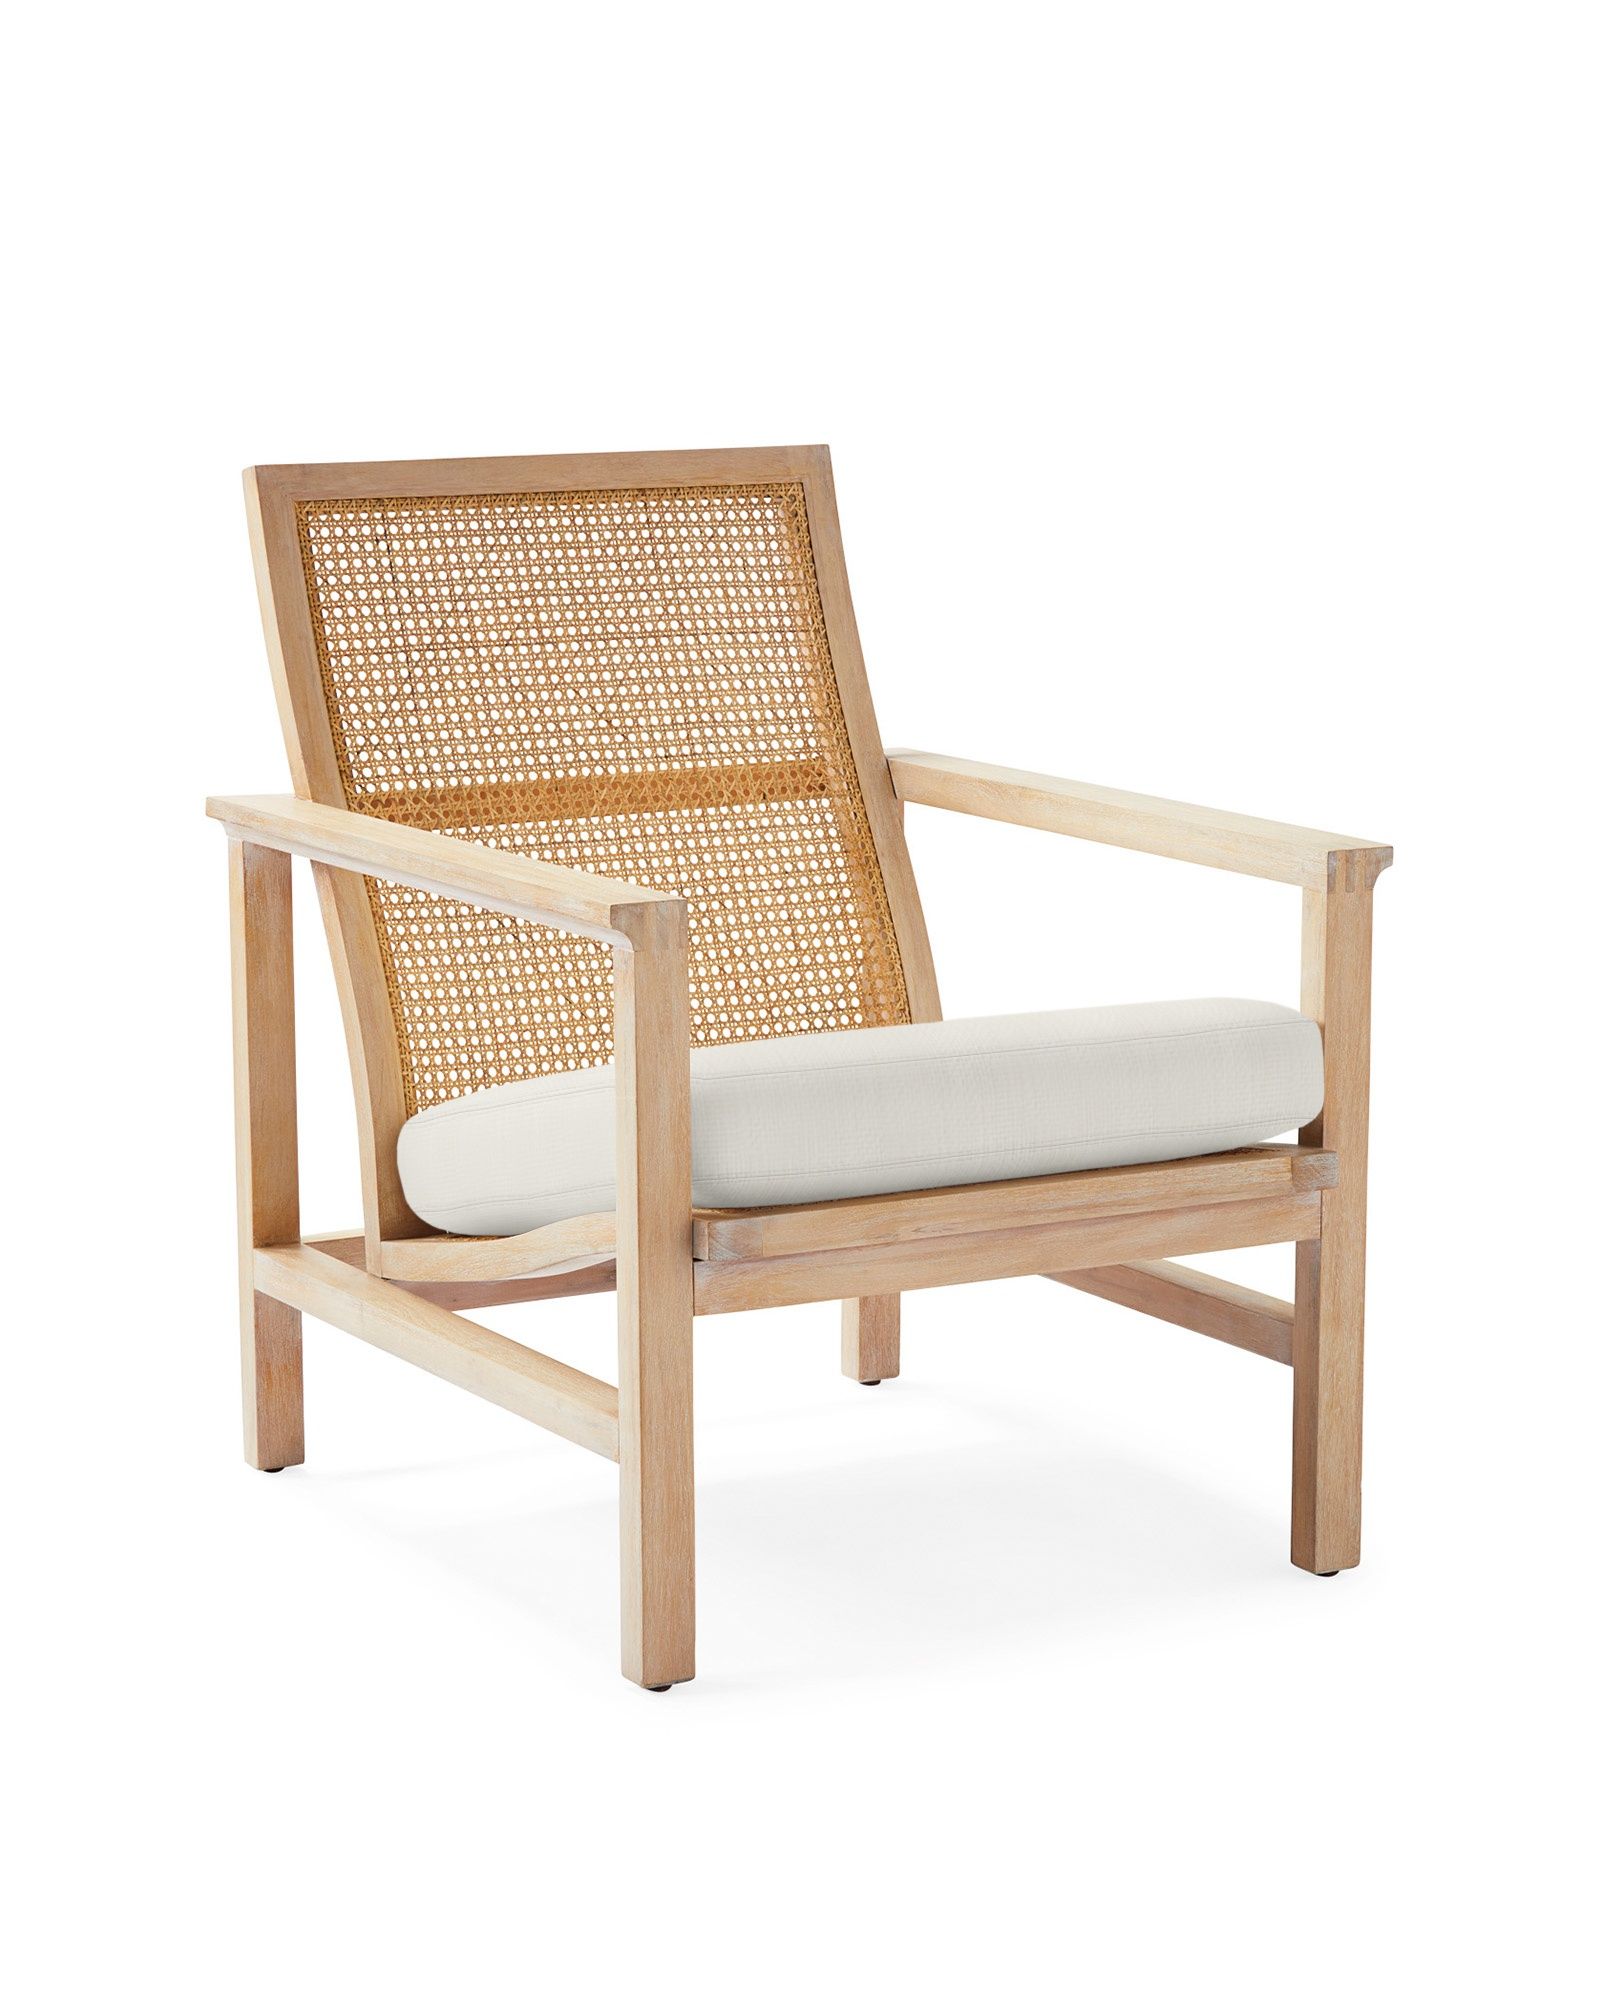 Georgica Lounge Chair | Serena and Lily